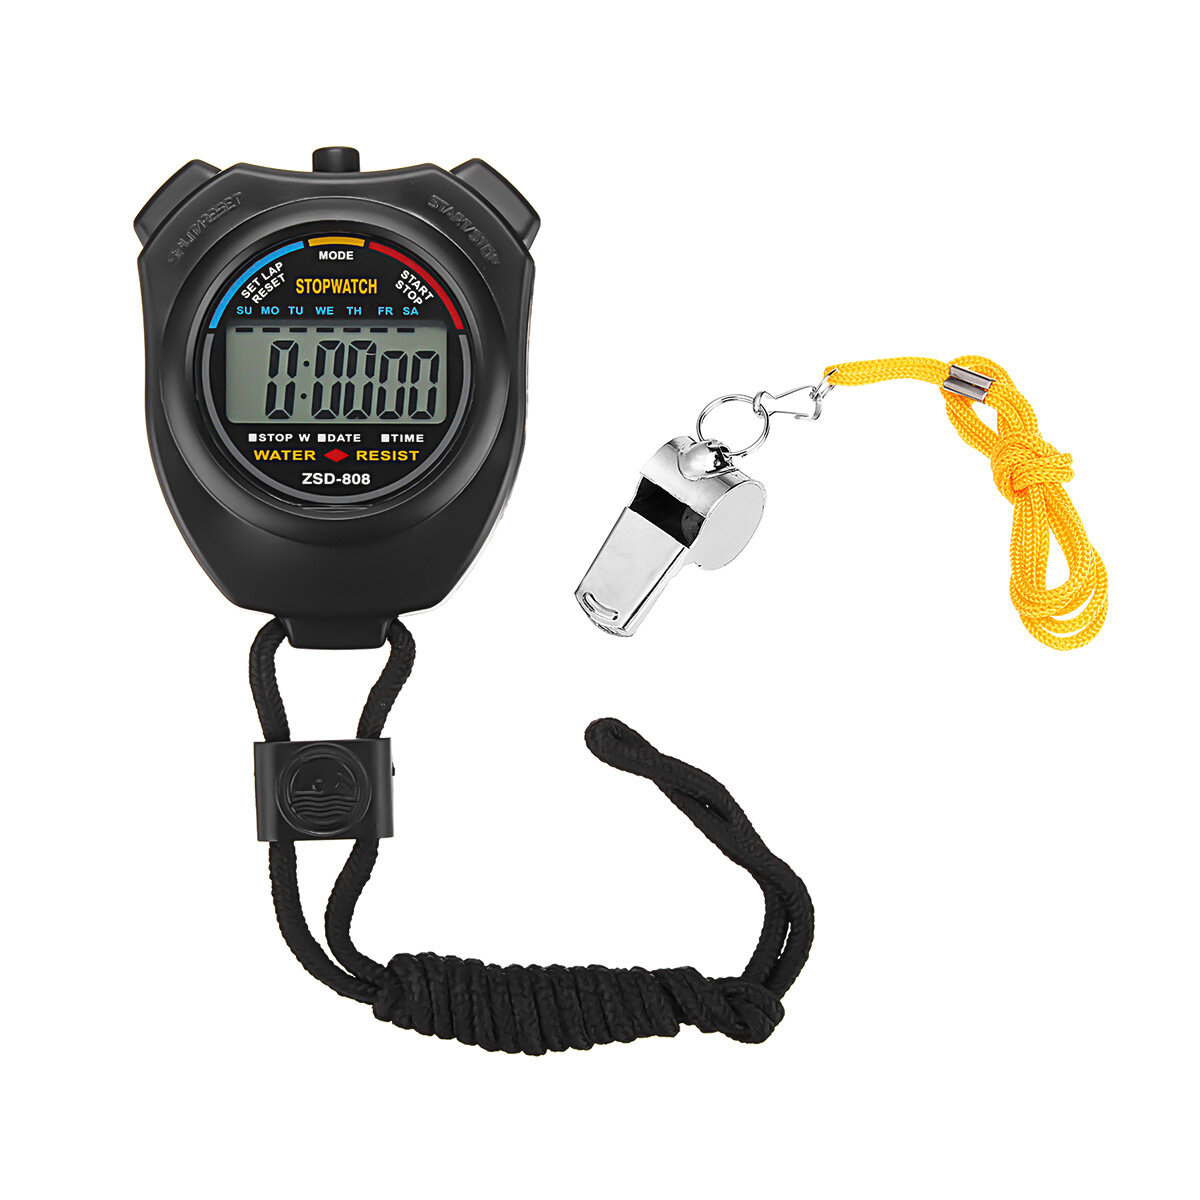 CHARMINER Whistle and Stopwatch Set Handheld Digital LCD Sports Stopwatch Lightweight Whistle for Outdoor Indoor Training